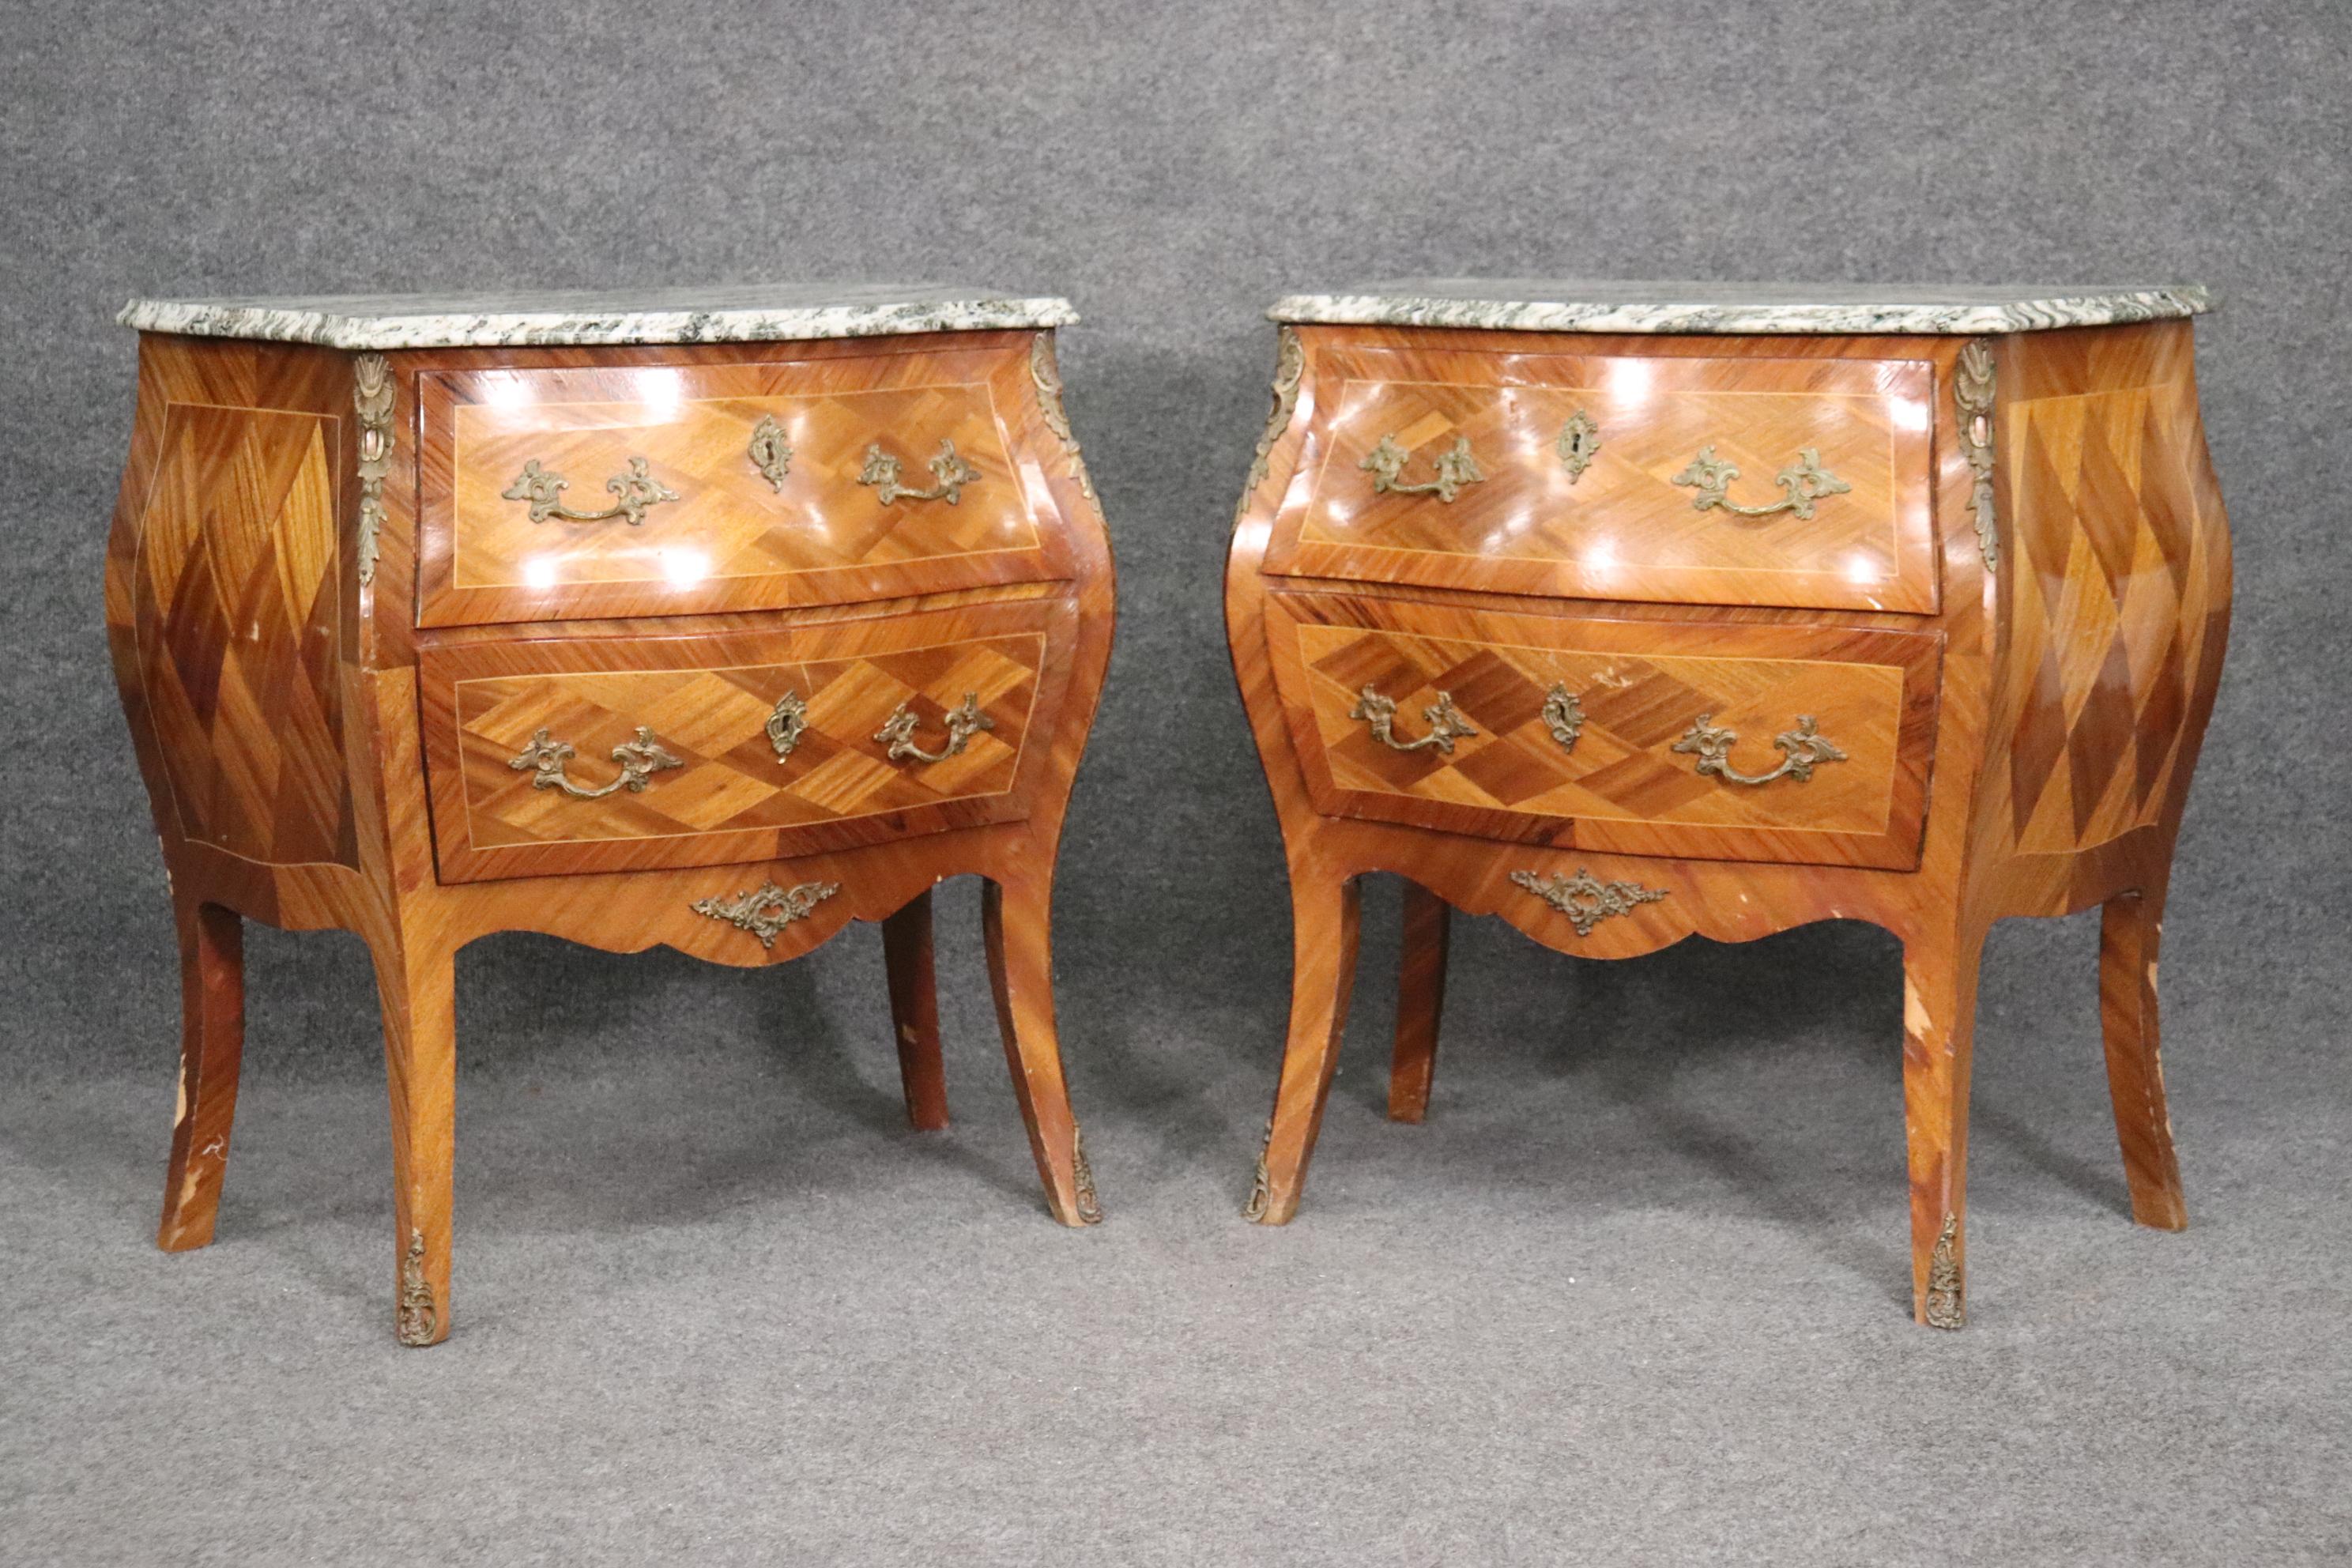 These are beautiful! Look at the kingwood marquetry cases and the gorgeous marble top. The stands are in very good condition and measures 28 wide x 18 deep x 30 tall. Dates to the 1940s era.